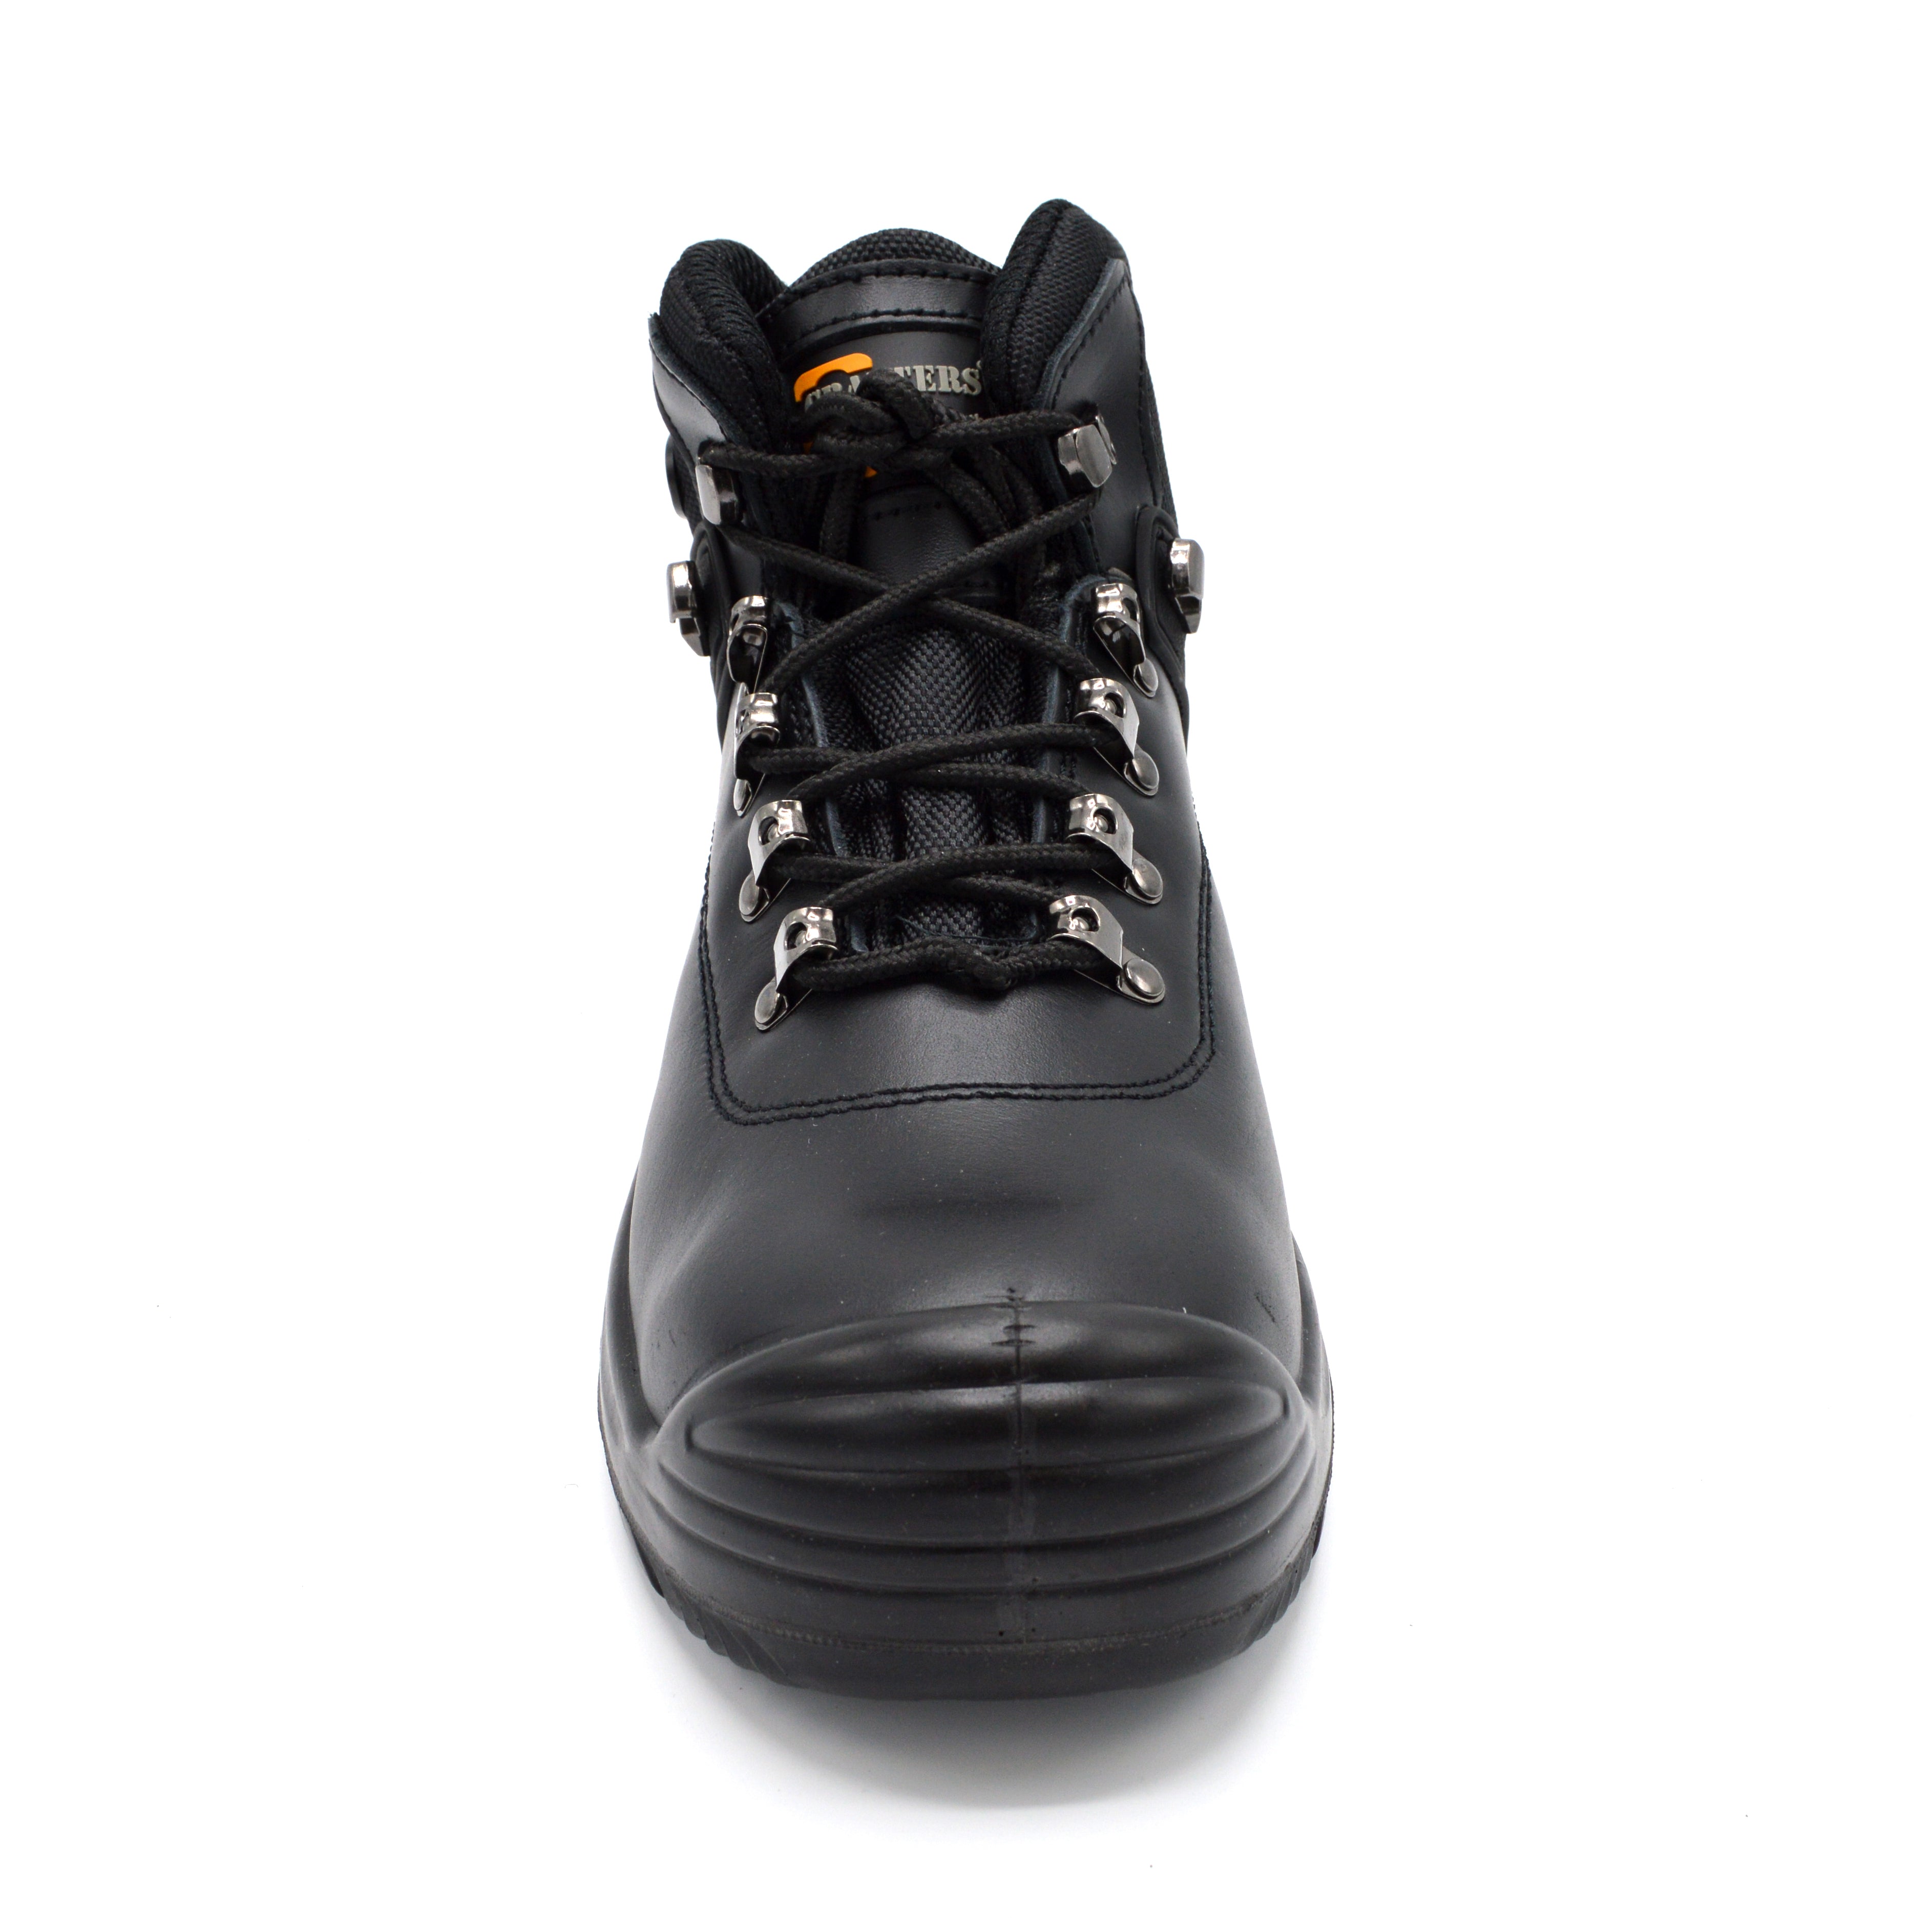 Black Lace-up Safety Boot for Bunions